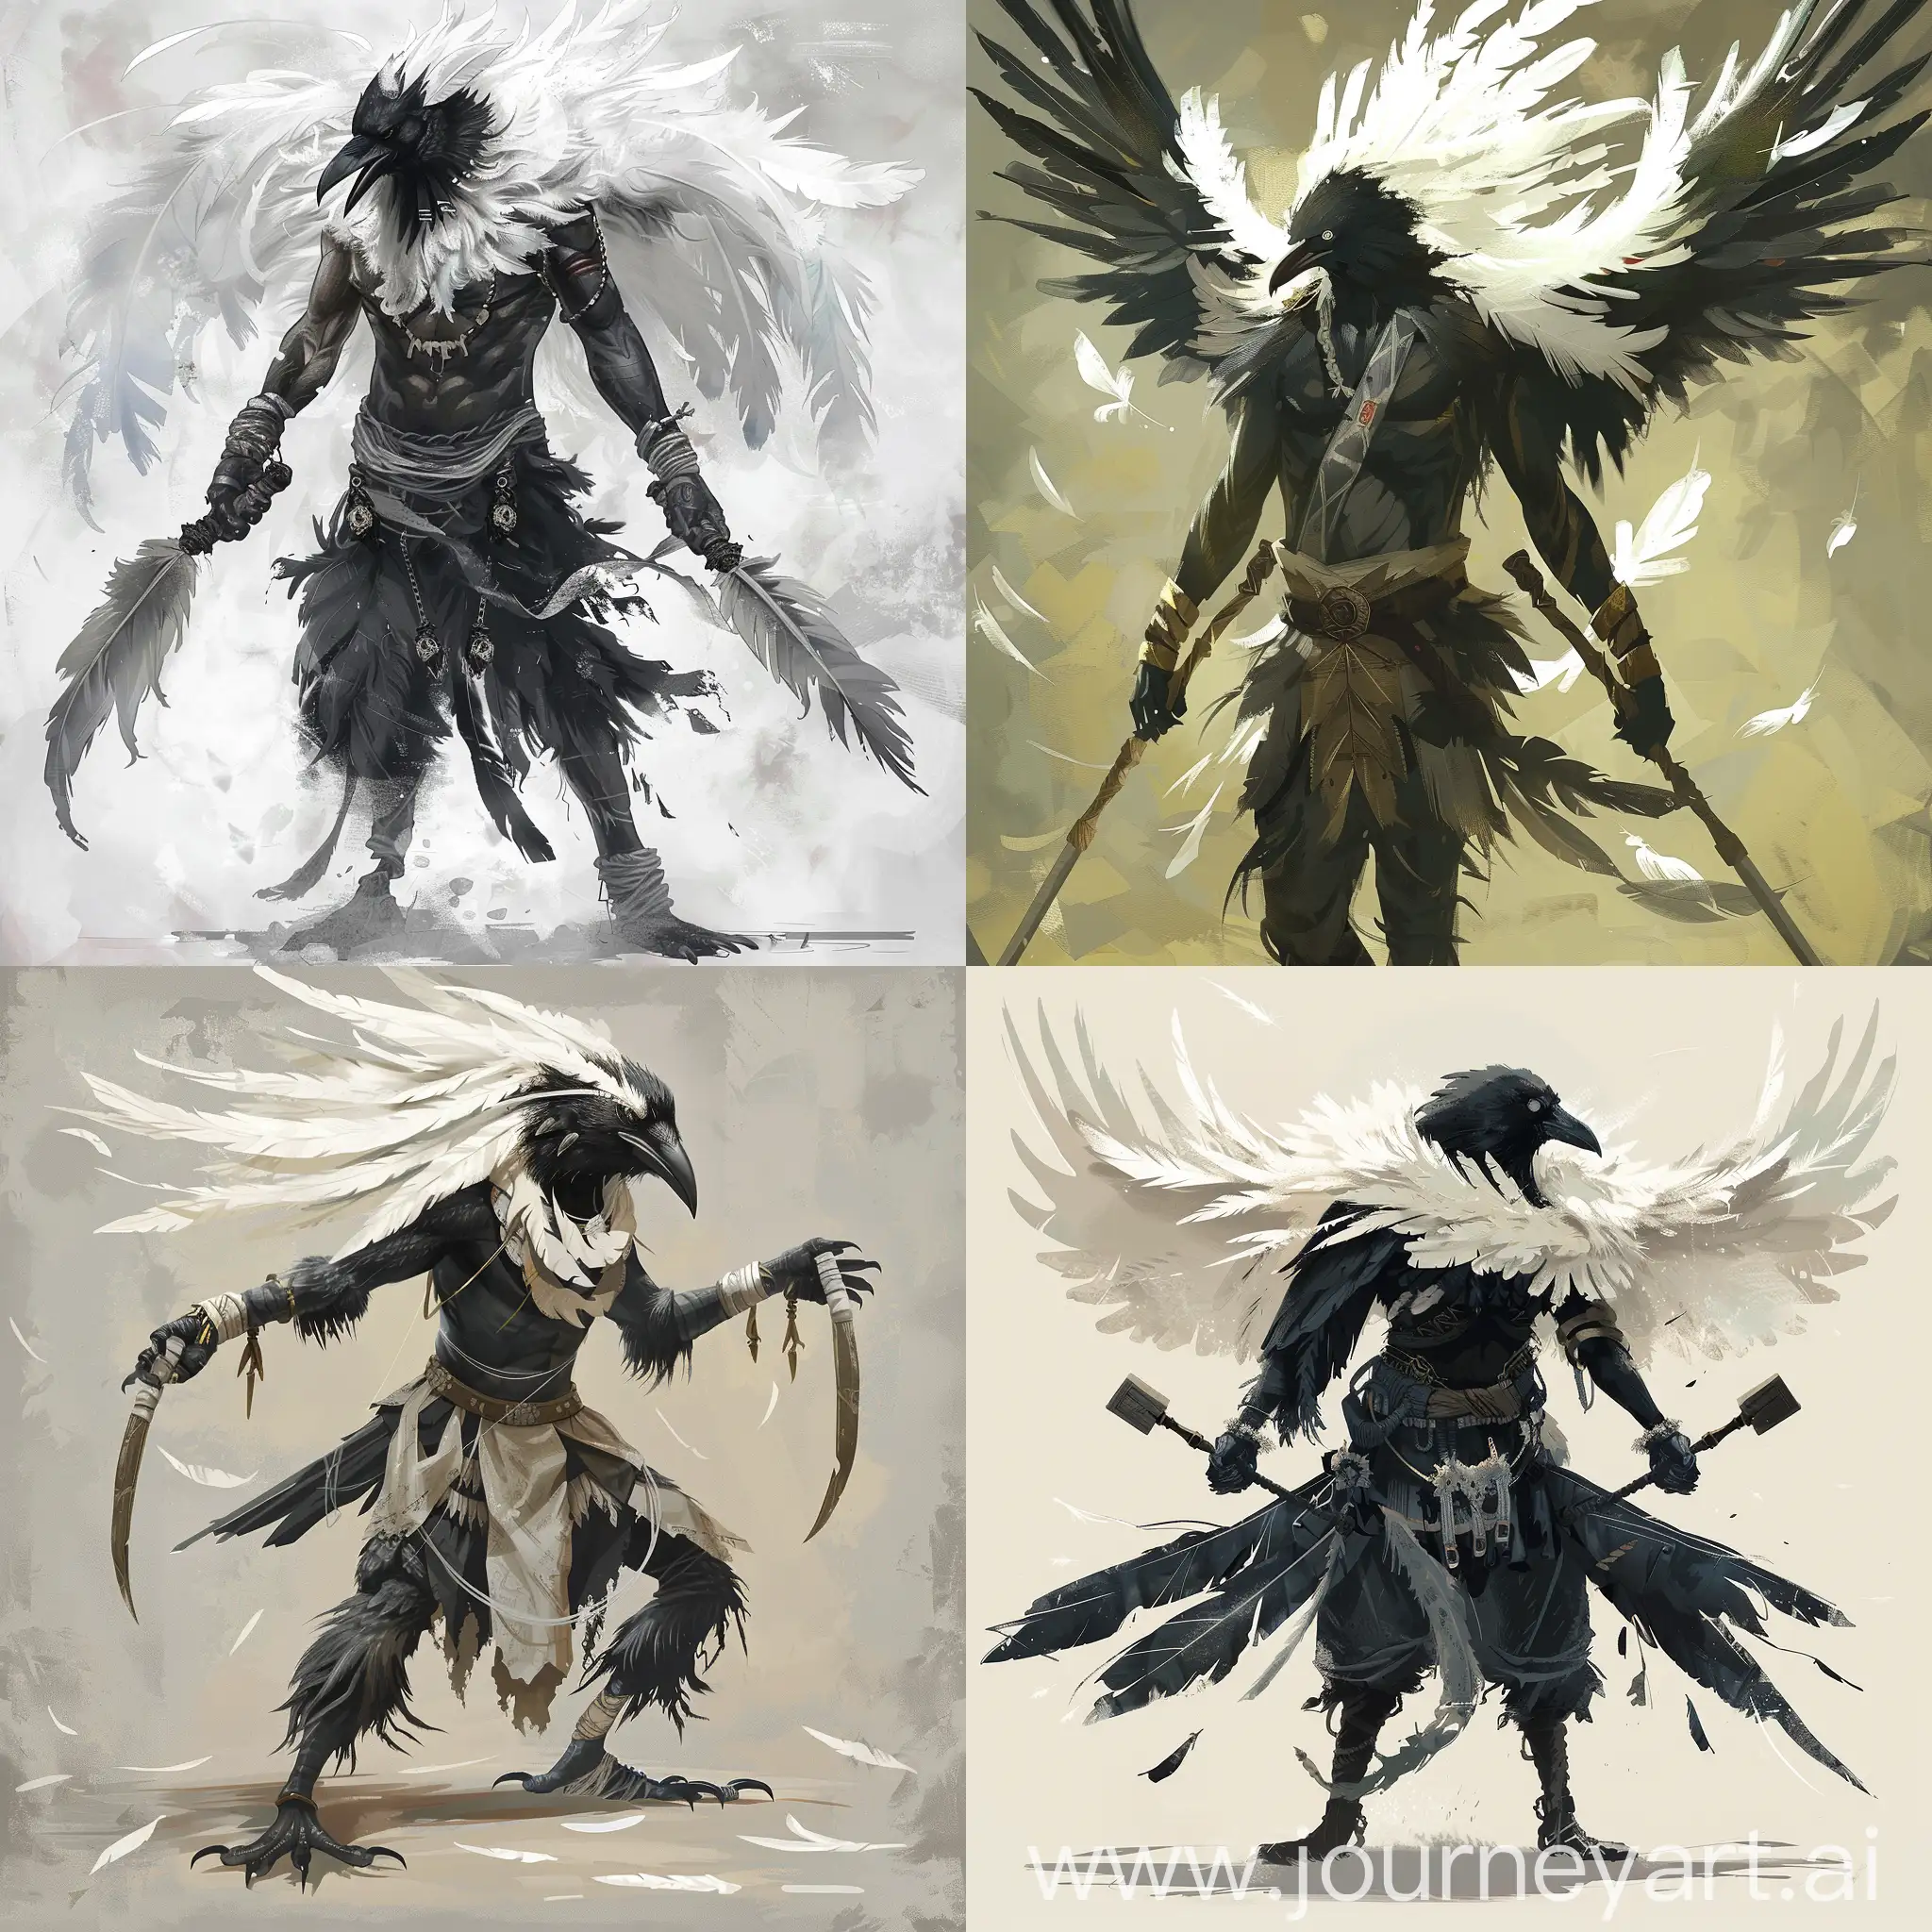 A man/crow hybrid with white feathers, weilding two ceremonial daggers.